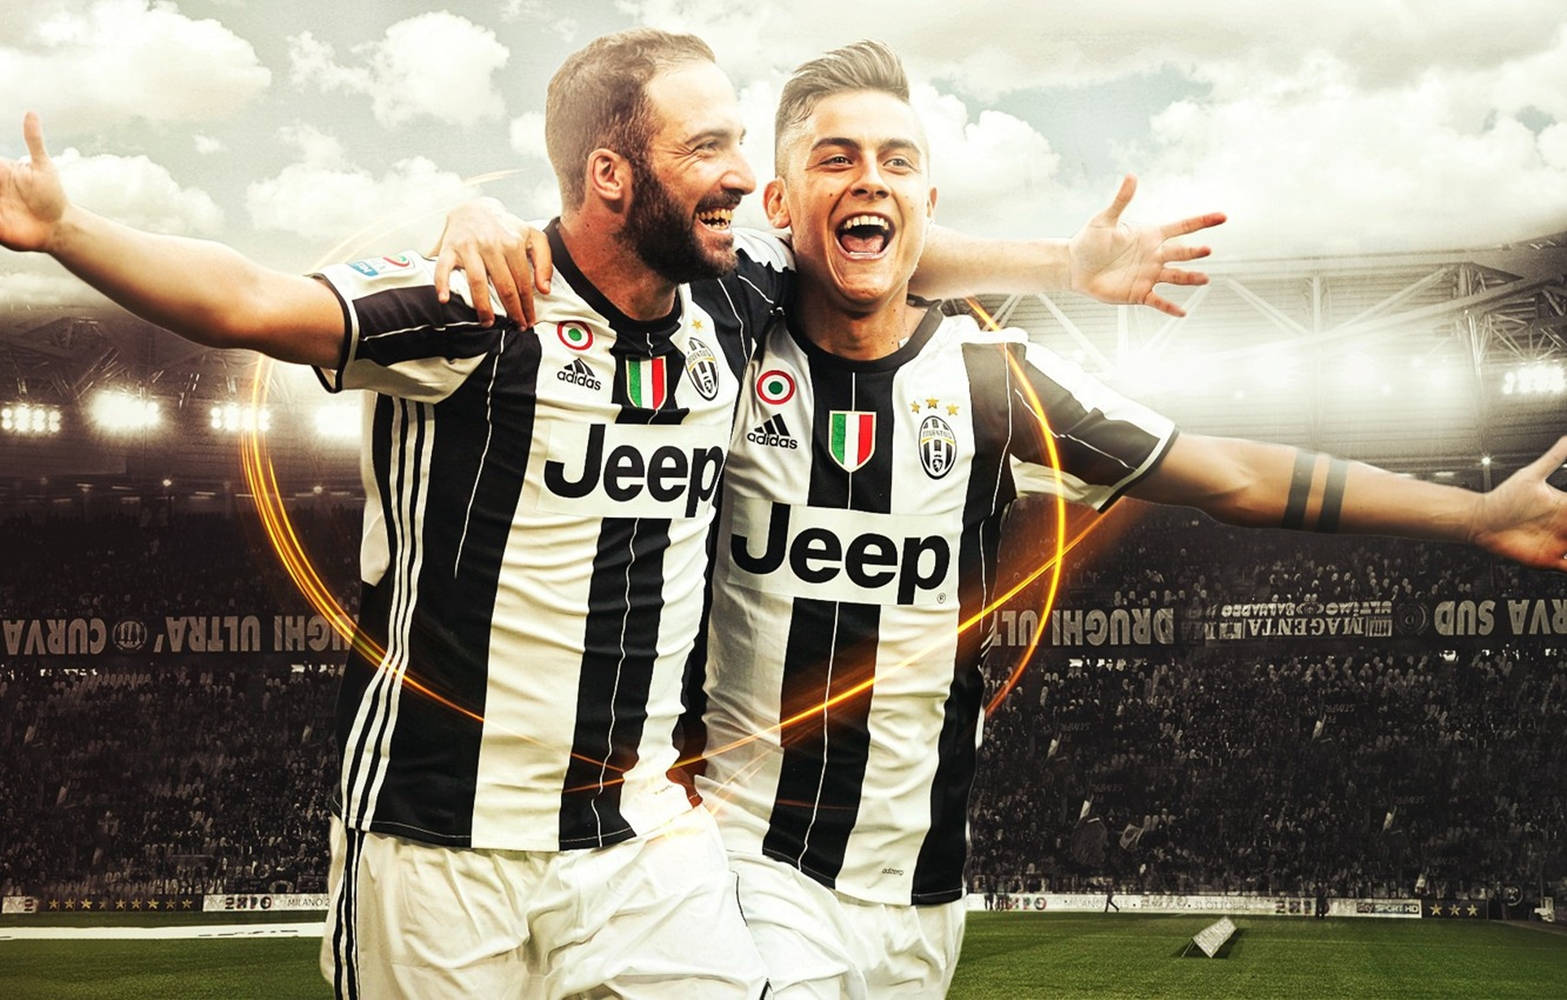 Capturing The Champions: Paulo Dybala And Gonzalo Higuain Of Juventus Background